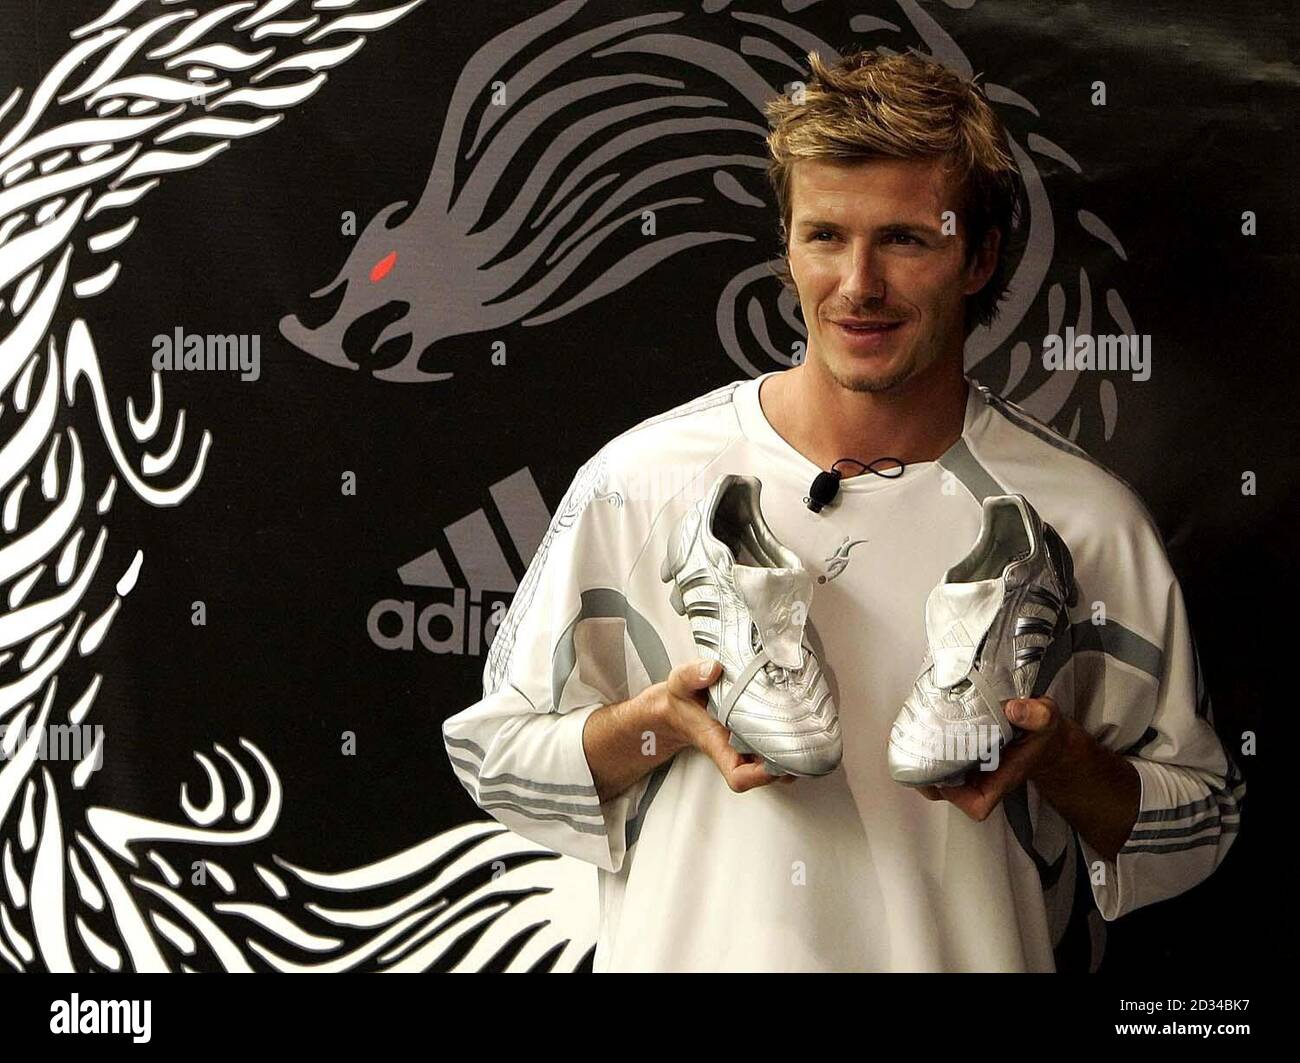 England captain David Beckham during the launch of the new Adidas Dragon football boots, at the Adidas store in New York Stock Photo - Alamy